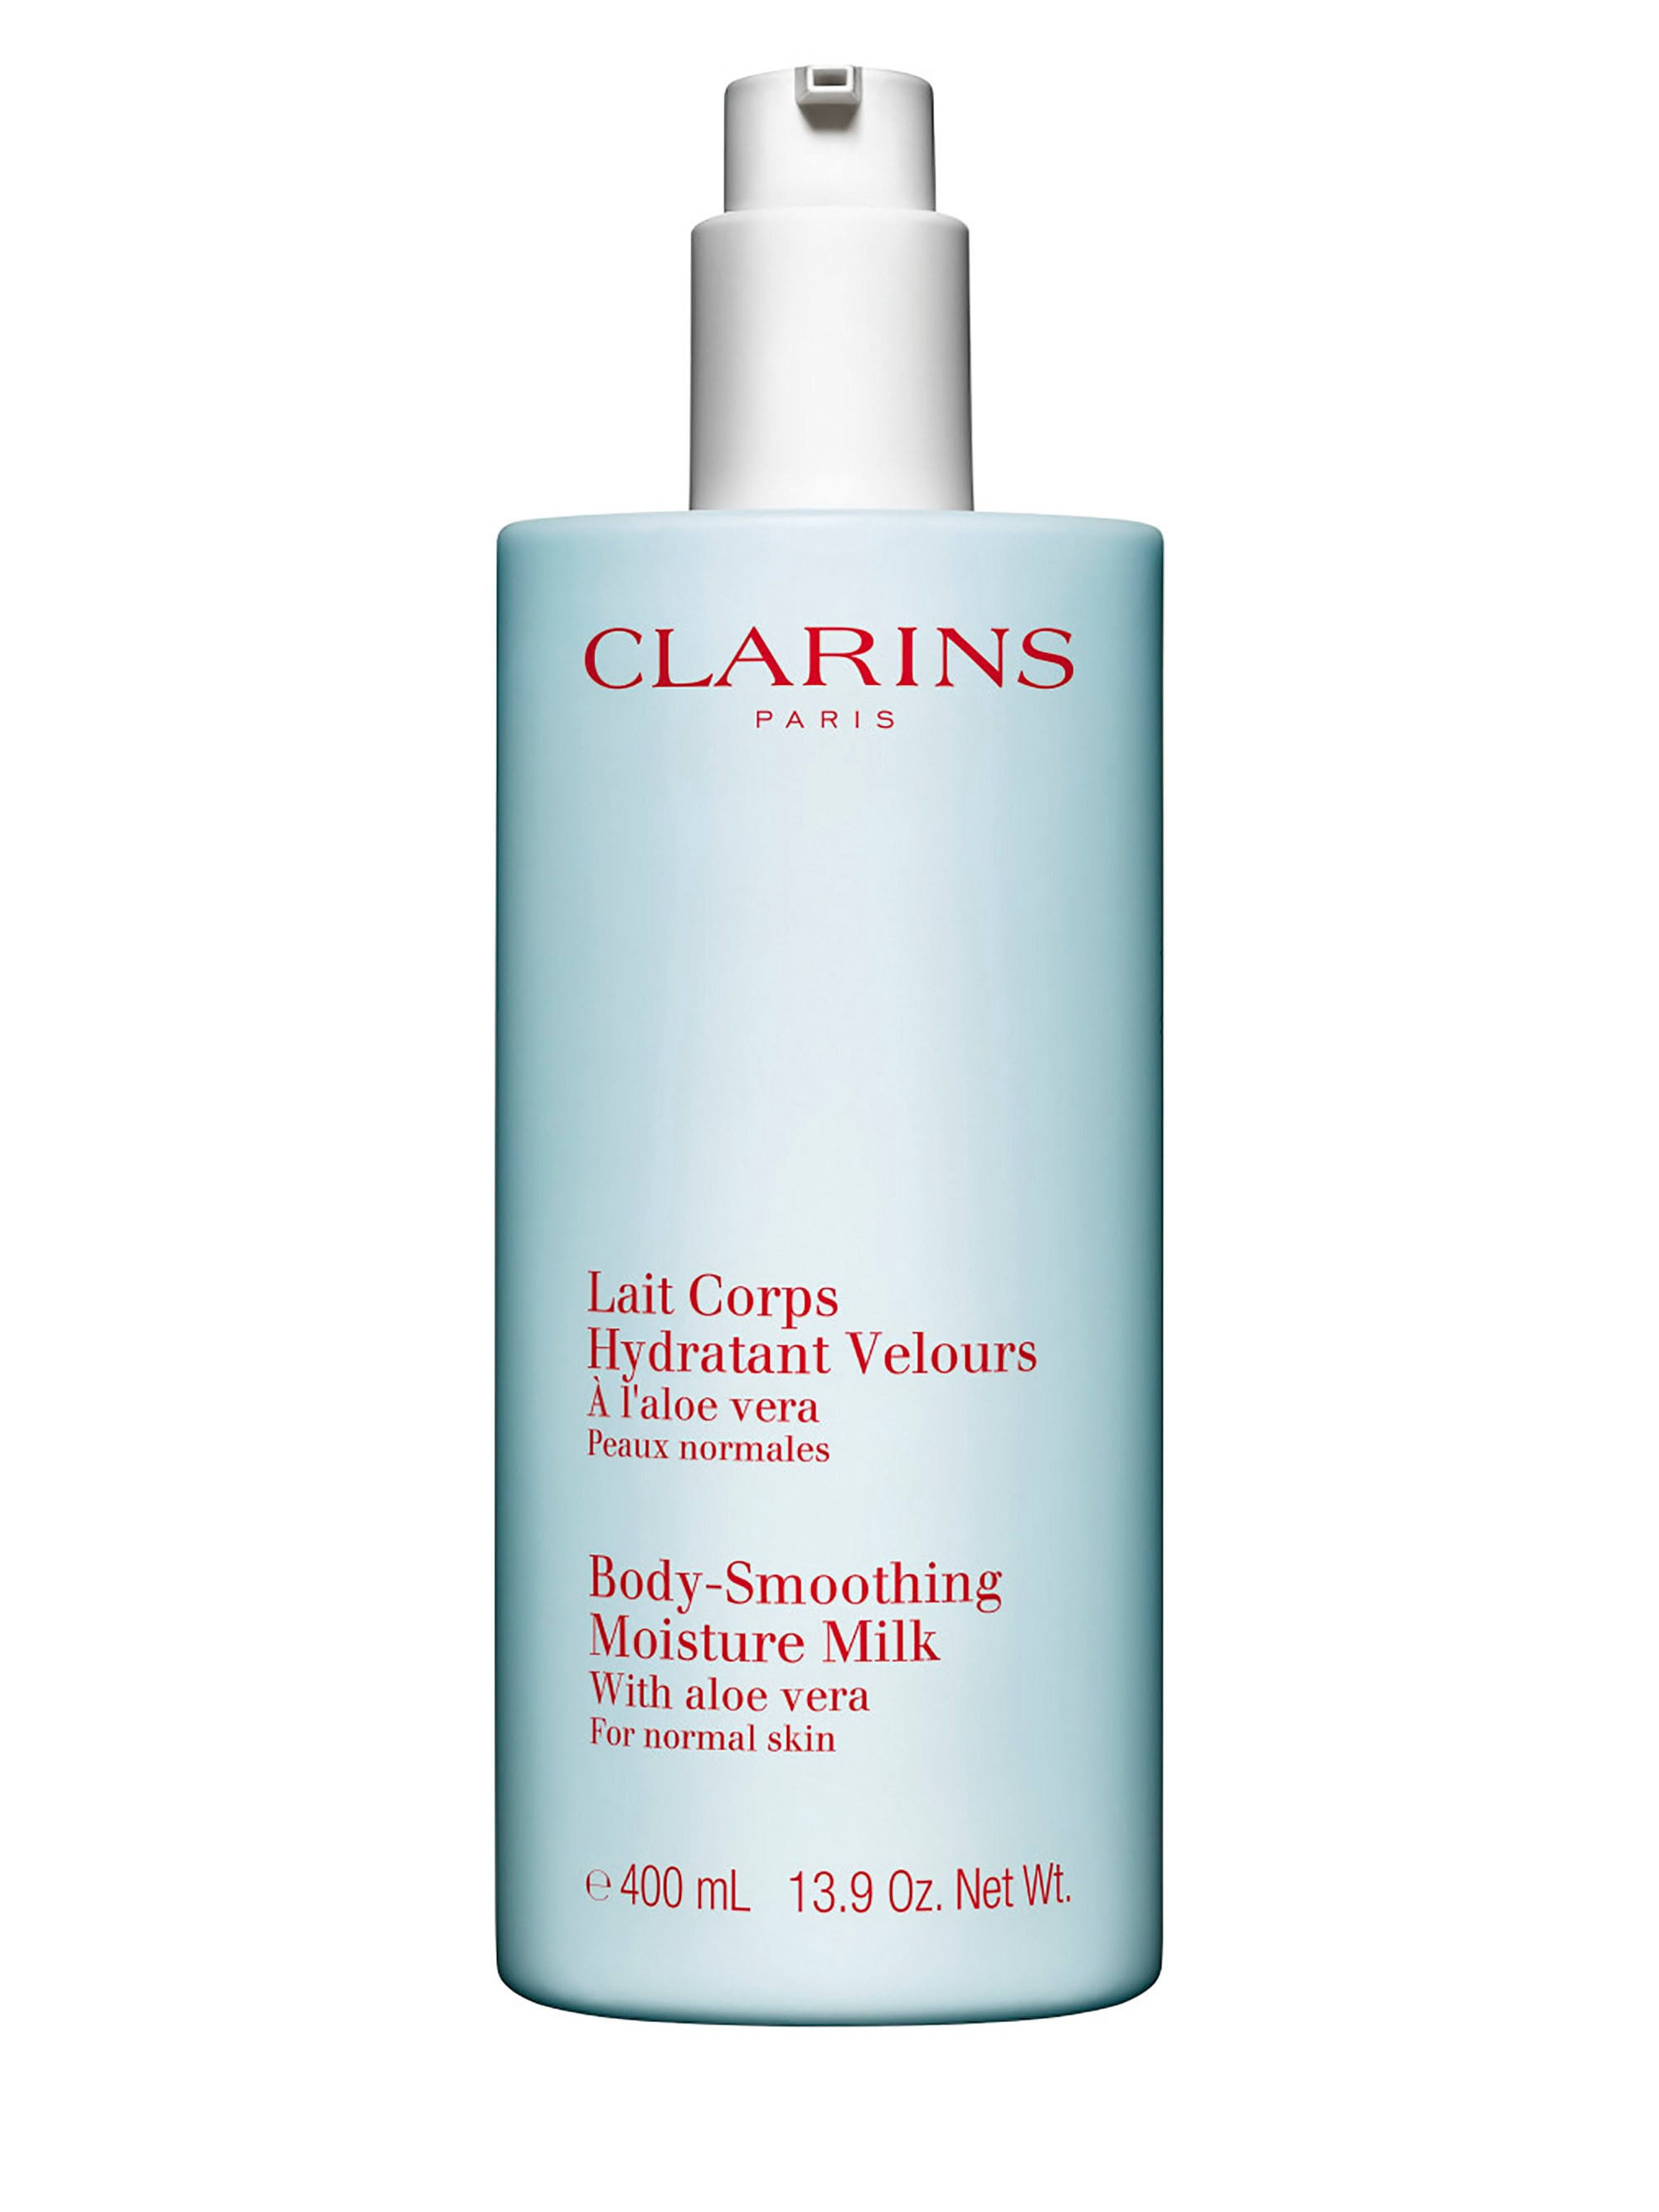 Clarins Body Smoothing Moisture Milk with Aloe Vera for Normal Skin 13.9oz